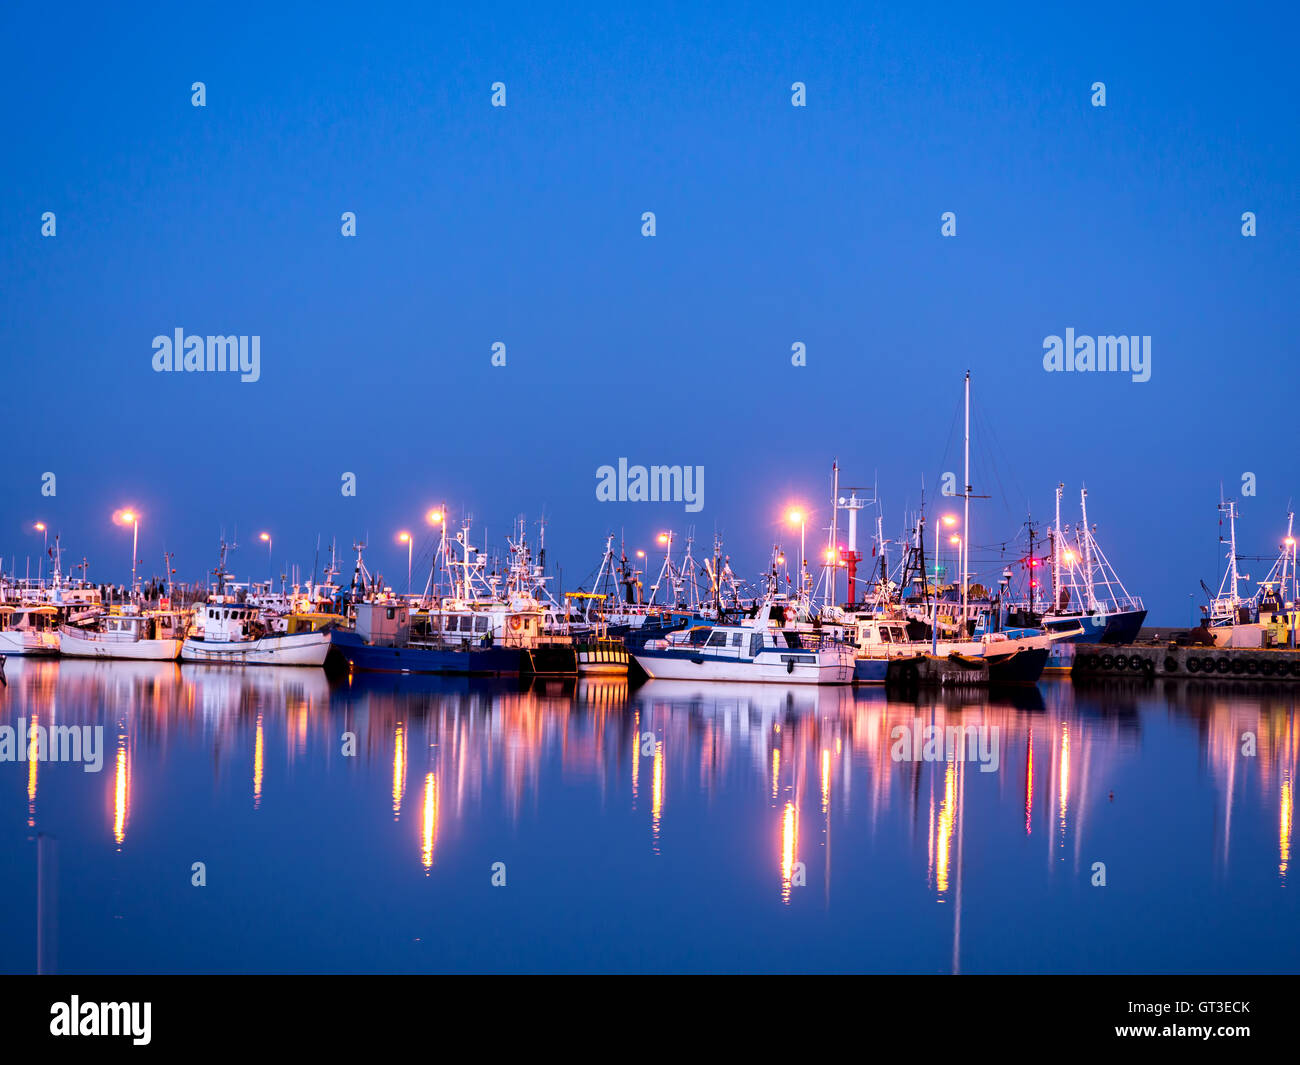 Fishing port at twilight with reflections Stock Photo